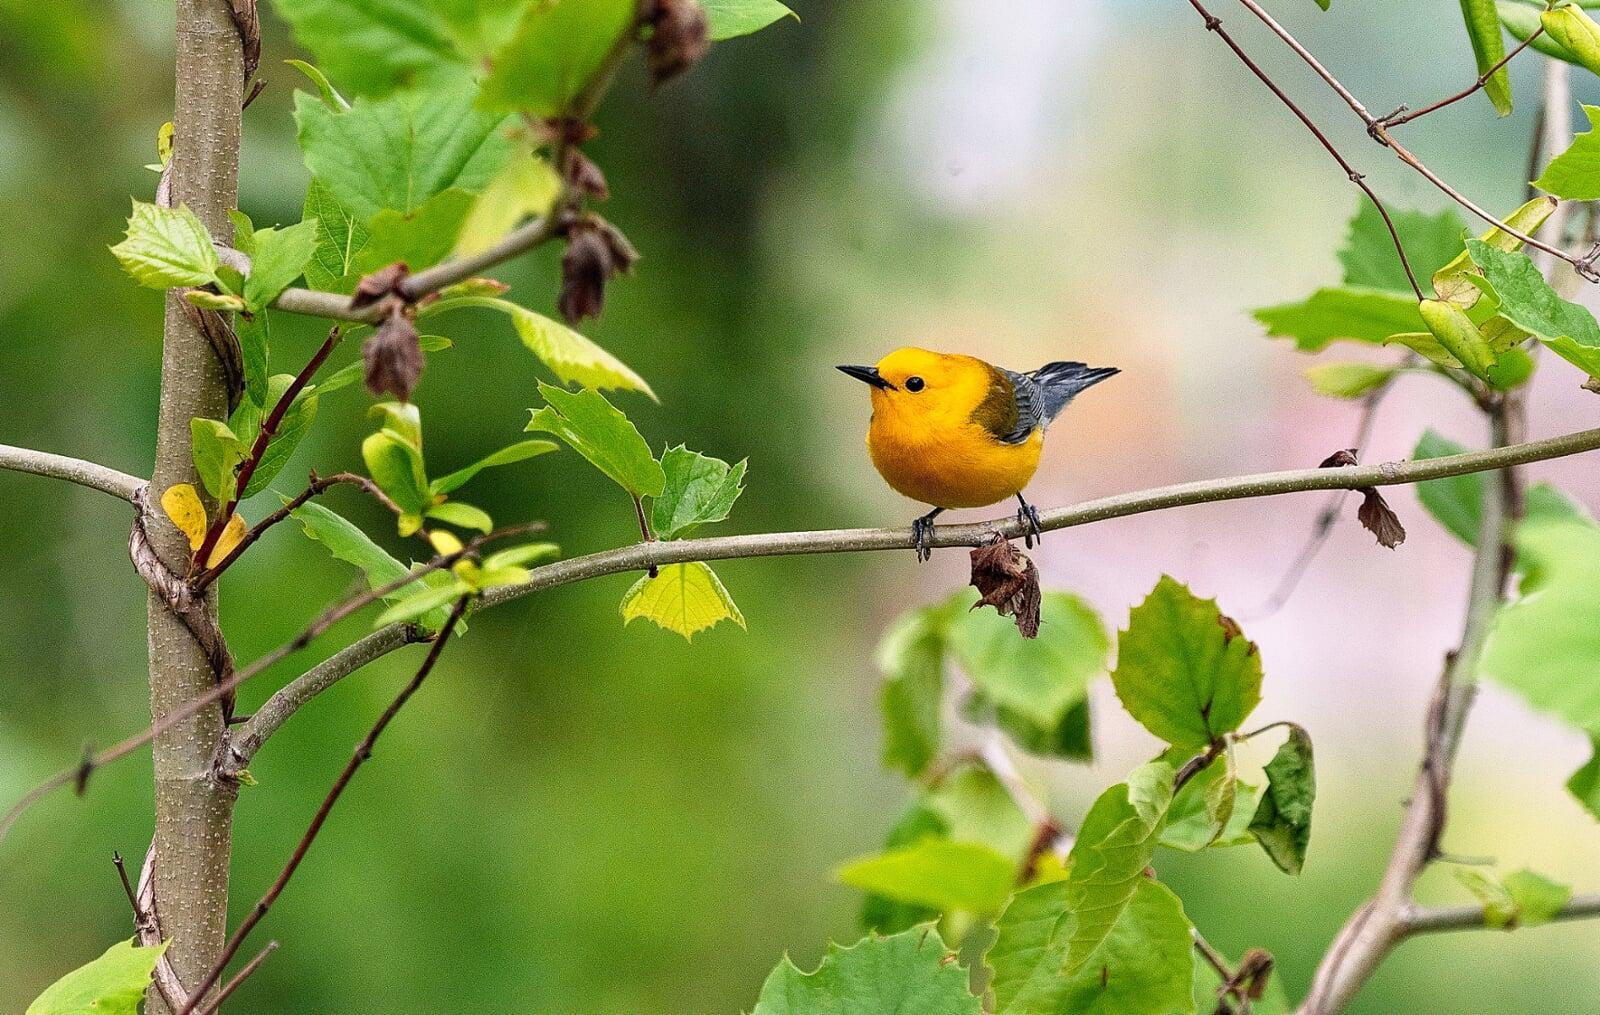 Prothonotary Warbler perched on a branch